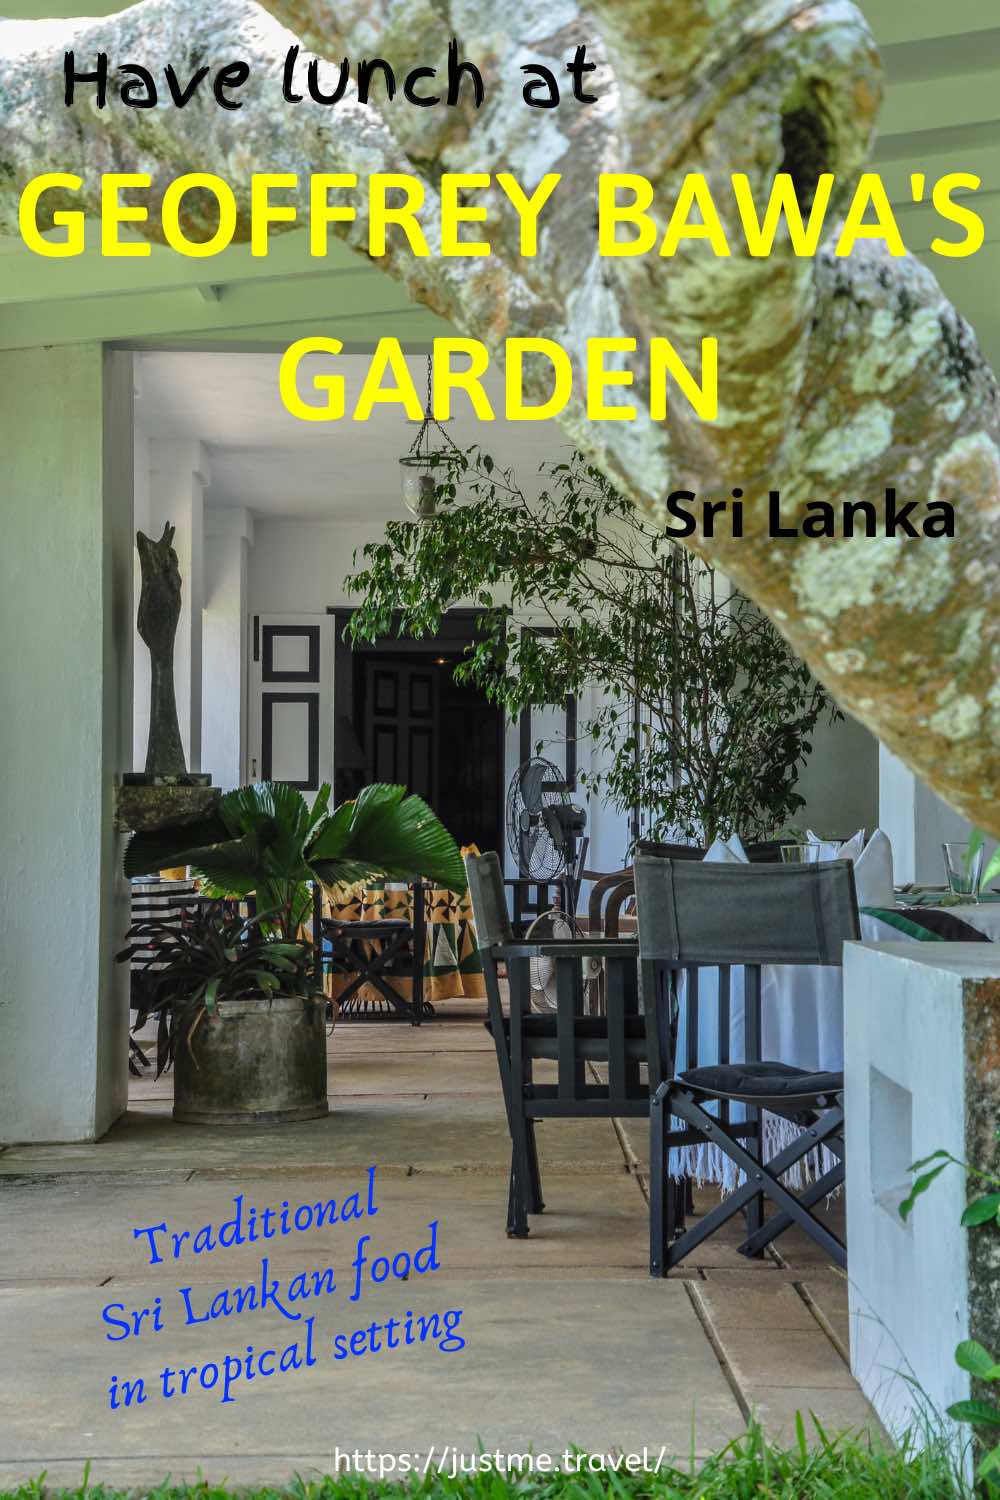 A photo of a house veranda set with tables and chairs for lunch. The writing on the photo states, Have lunch at Geoffrey Bawa's Garden in Sri Lanka.